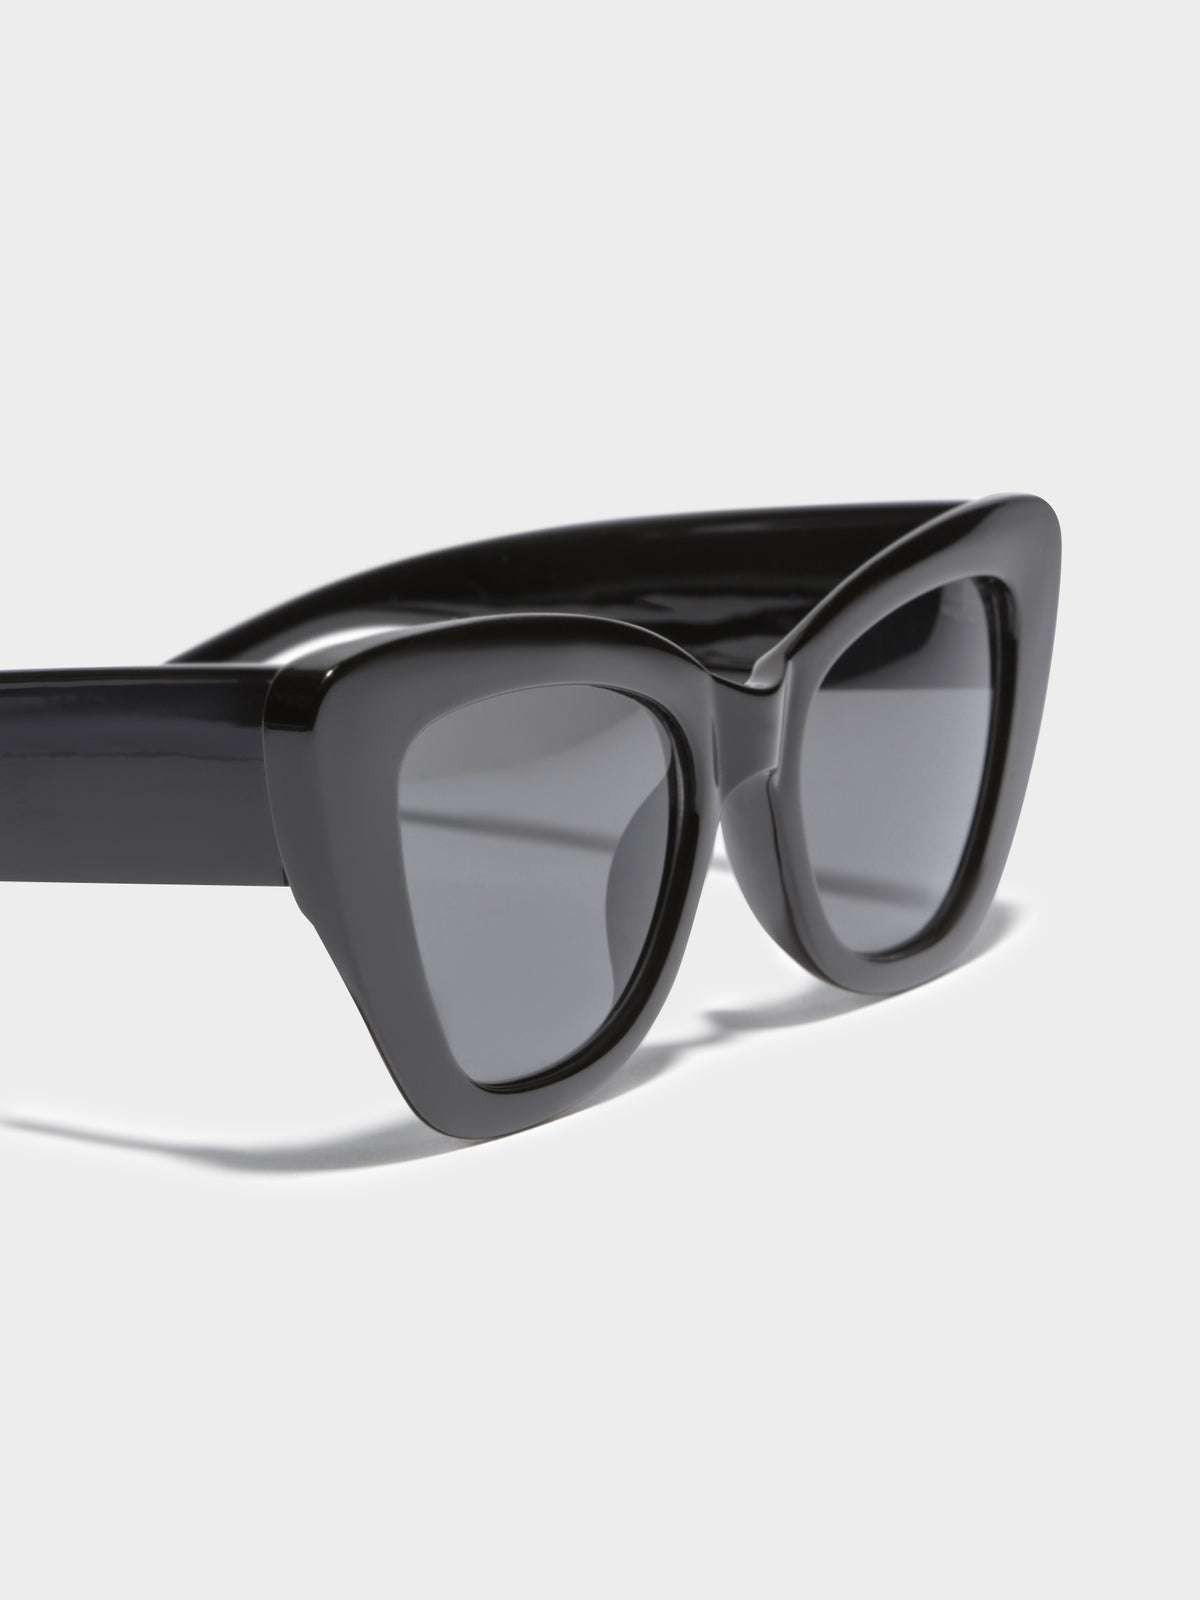 Mulholland Butterfly Sunglasses in Black